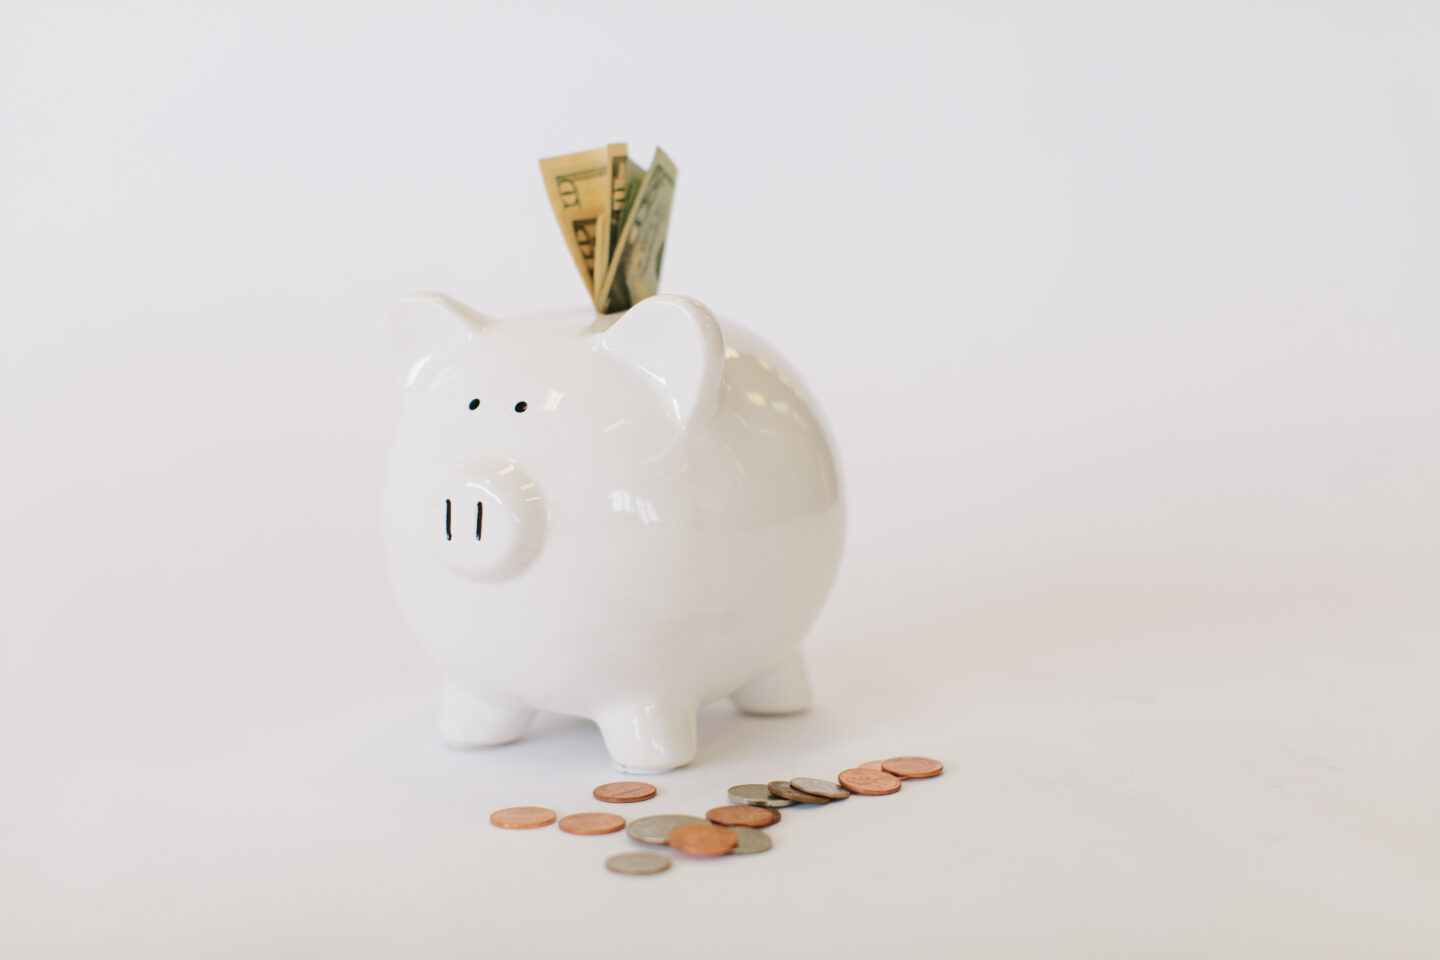 A white piggy bank with a money stuffed in the slot and coins on the side illustrate setting your vacation budget while trip planning. How to Plan a Vacation on a Budget